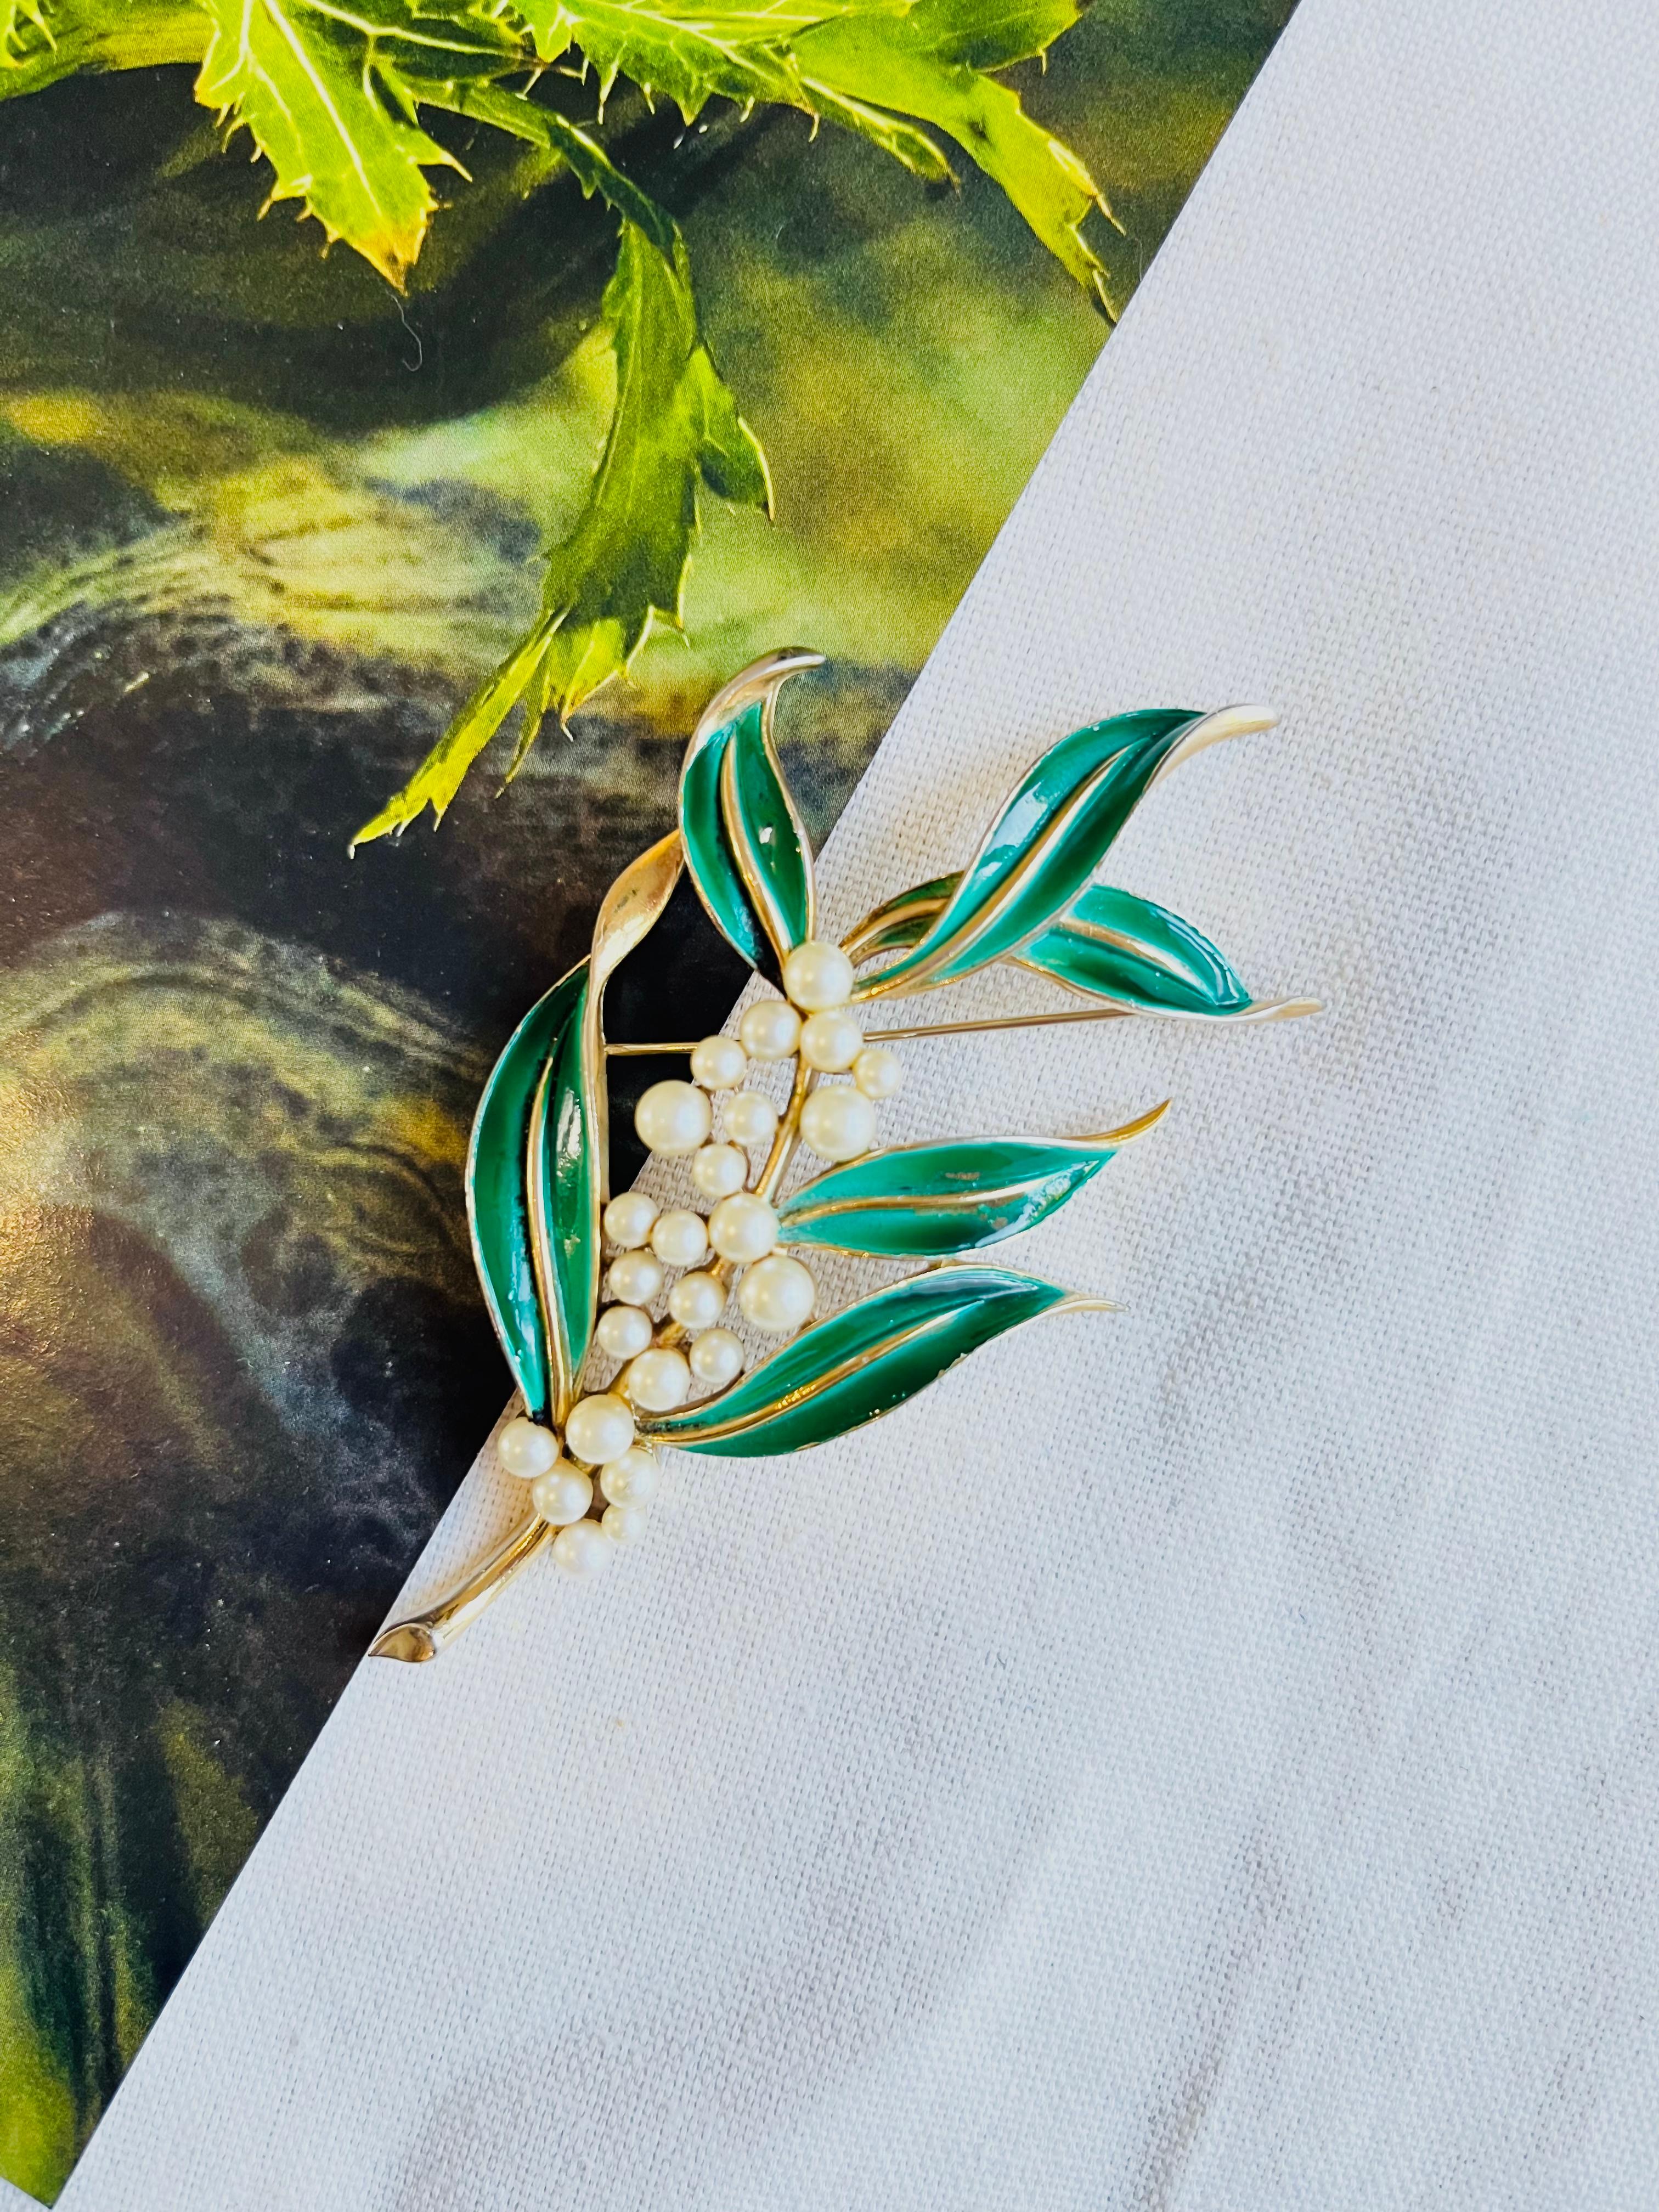 Very good condition. Some very light scratches, since over 70 years. 100% genuine.

A very beautiful brooch, signed at the back.

Size: 10.0*5.0 cm.

Weight: 33 g/each.

Crown Trifari created some of the most desirable costume jewellery of the